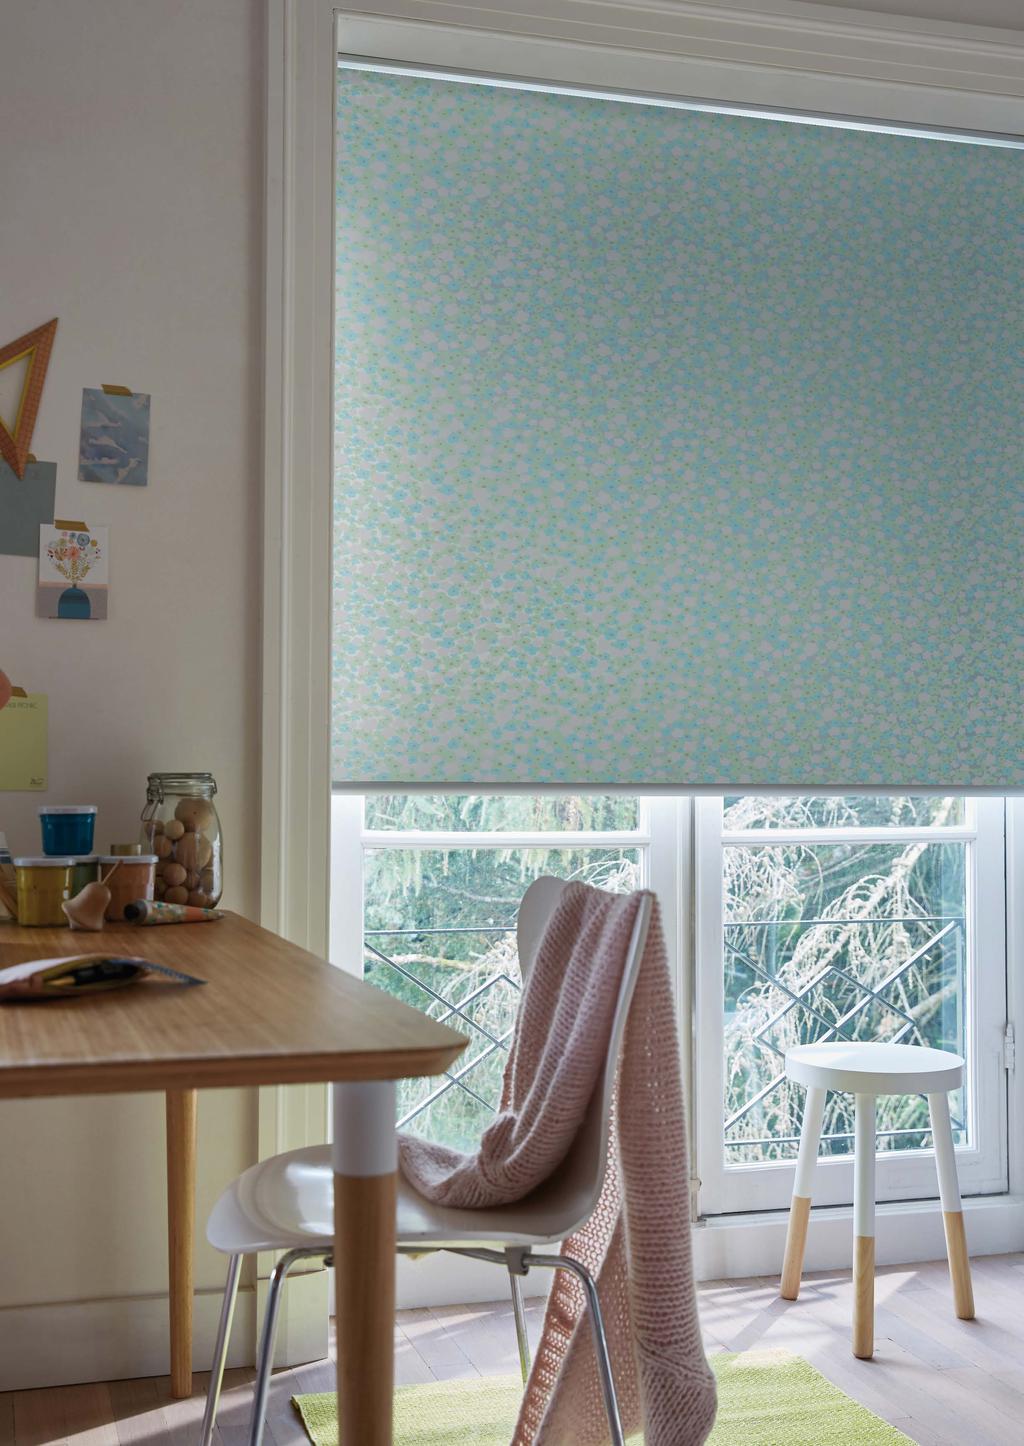 Luxaflex Print Collection Introducing the Print Collection from Luxaflex Window Fashions We are delighted to introduce the Luxaflex Print Collection.